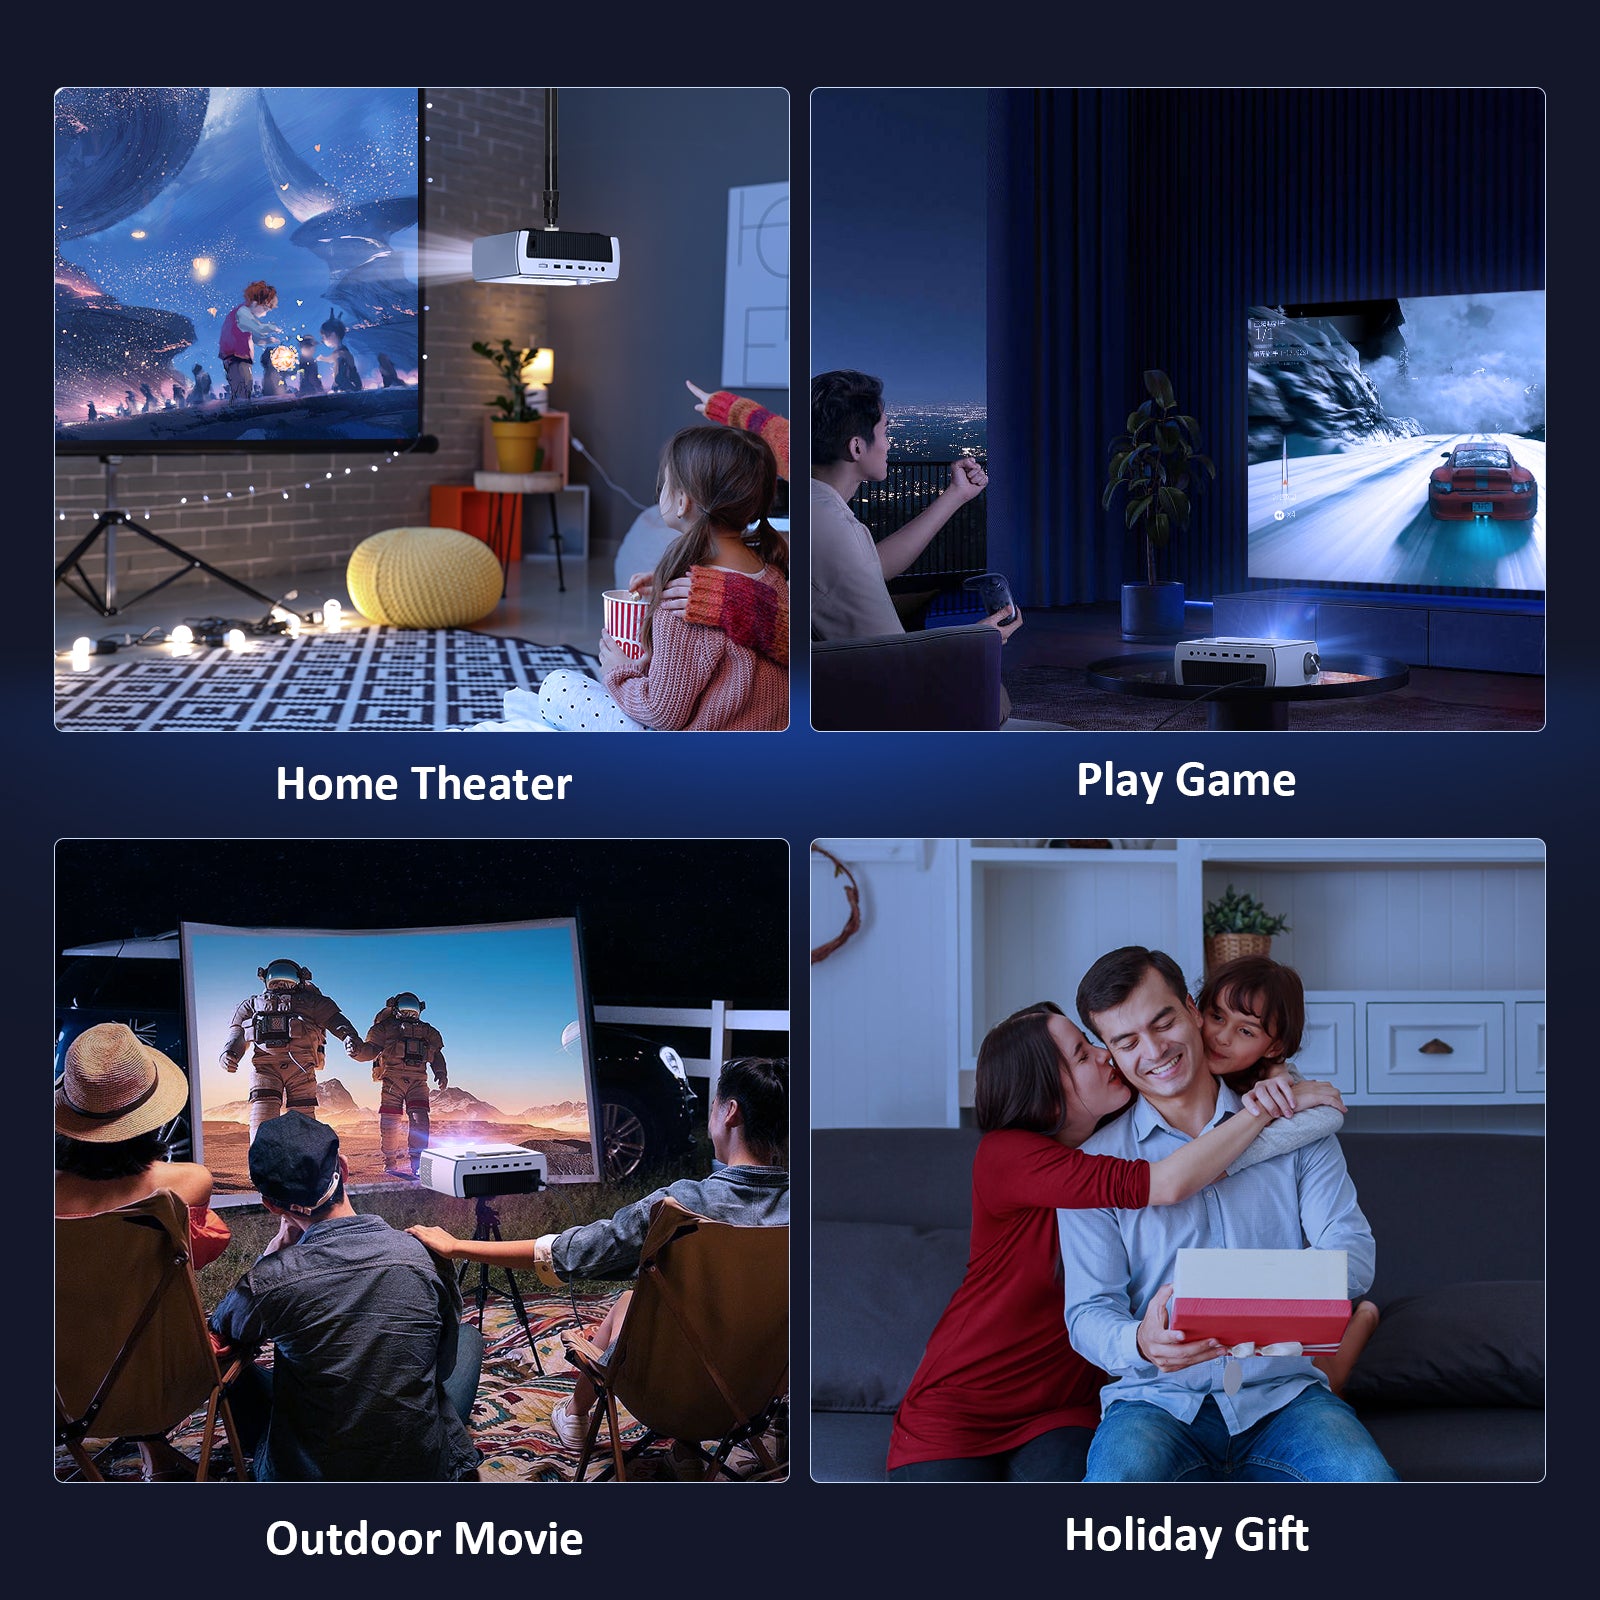 The PJ10 projector can be used for home theater, gaming, outdoor movies, and as a holiday gift.